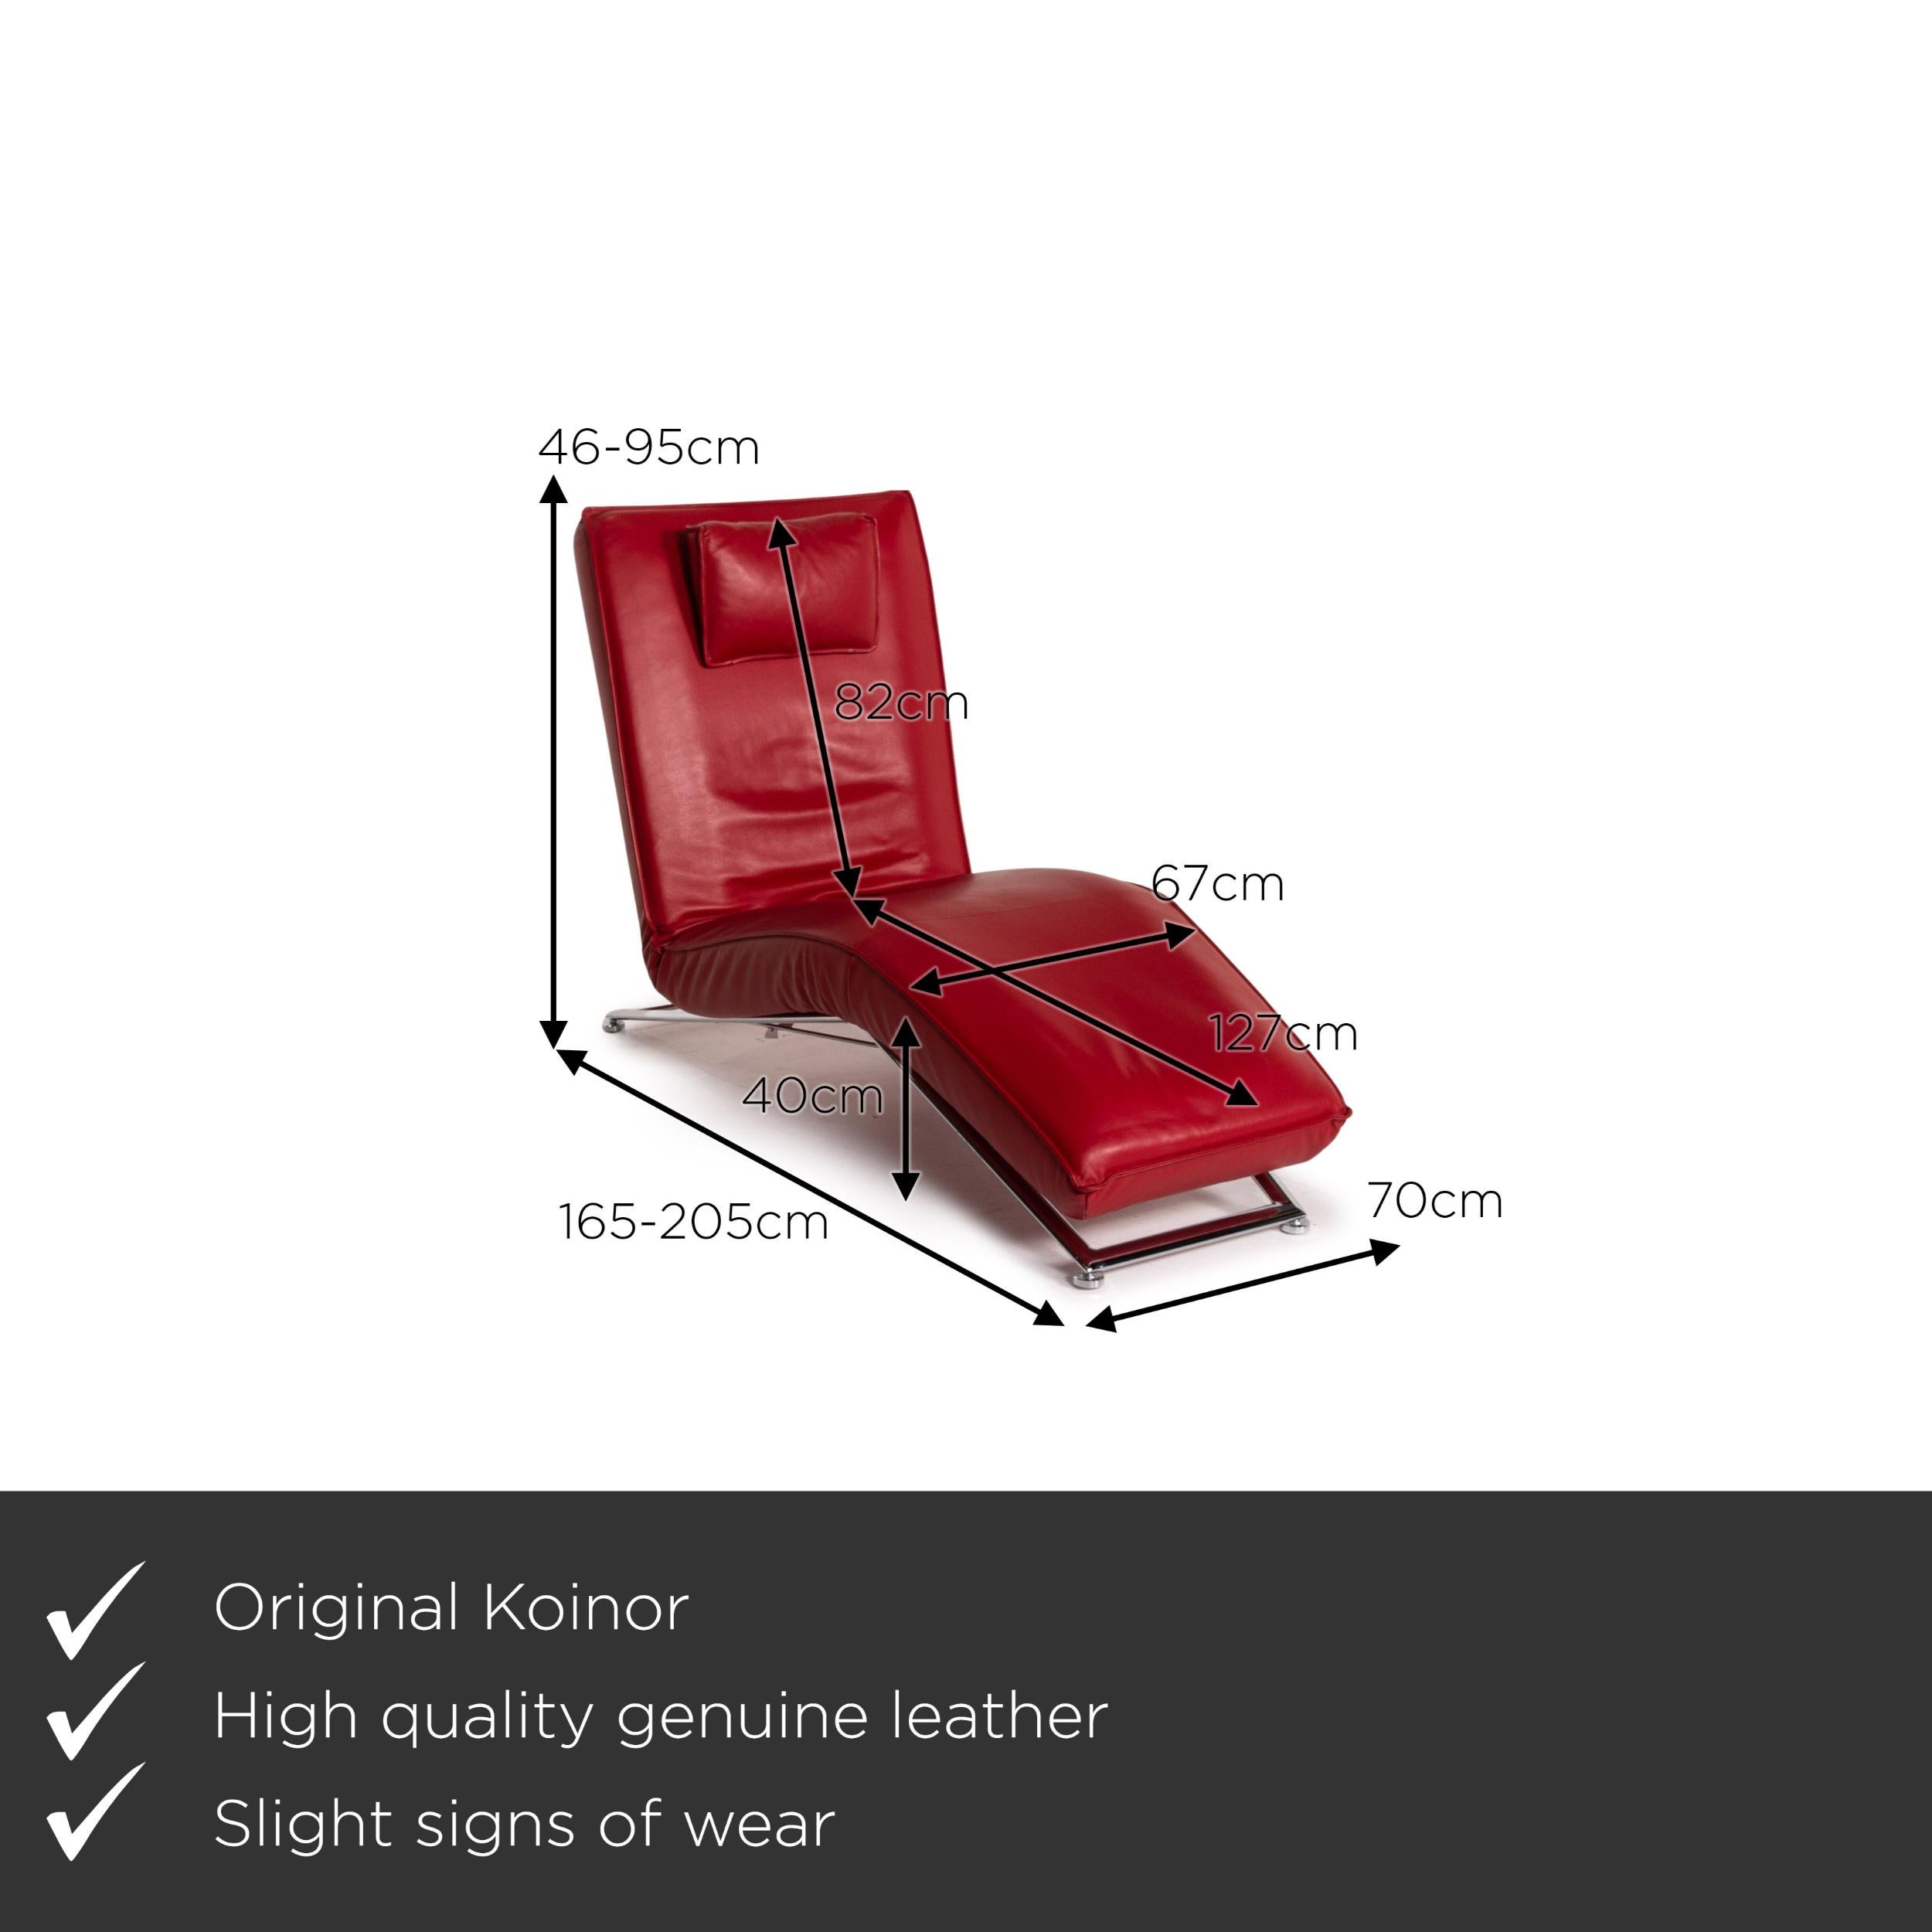 We present to you a KoinorJeremiah leather lounger red relaxation function relaxation lounger.


 Product measurements in centimeters:
 

Depth: 205
Width: 70
Height: 46
Seat height: 40
Rest height:
Seat depth: 127
Seat width: 67
Back